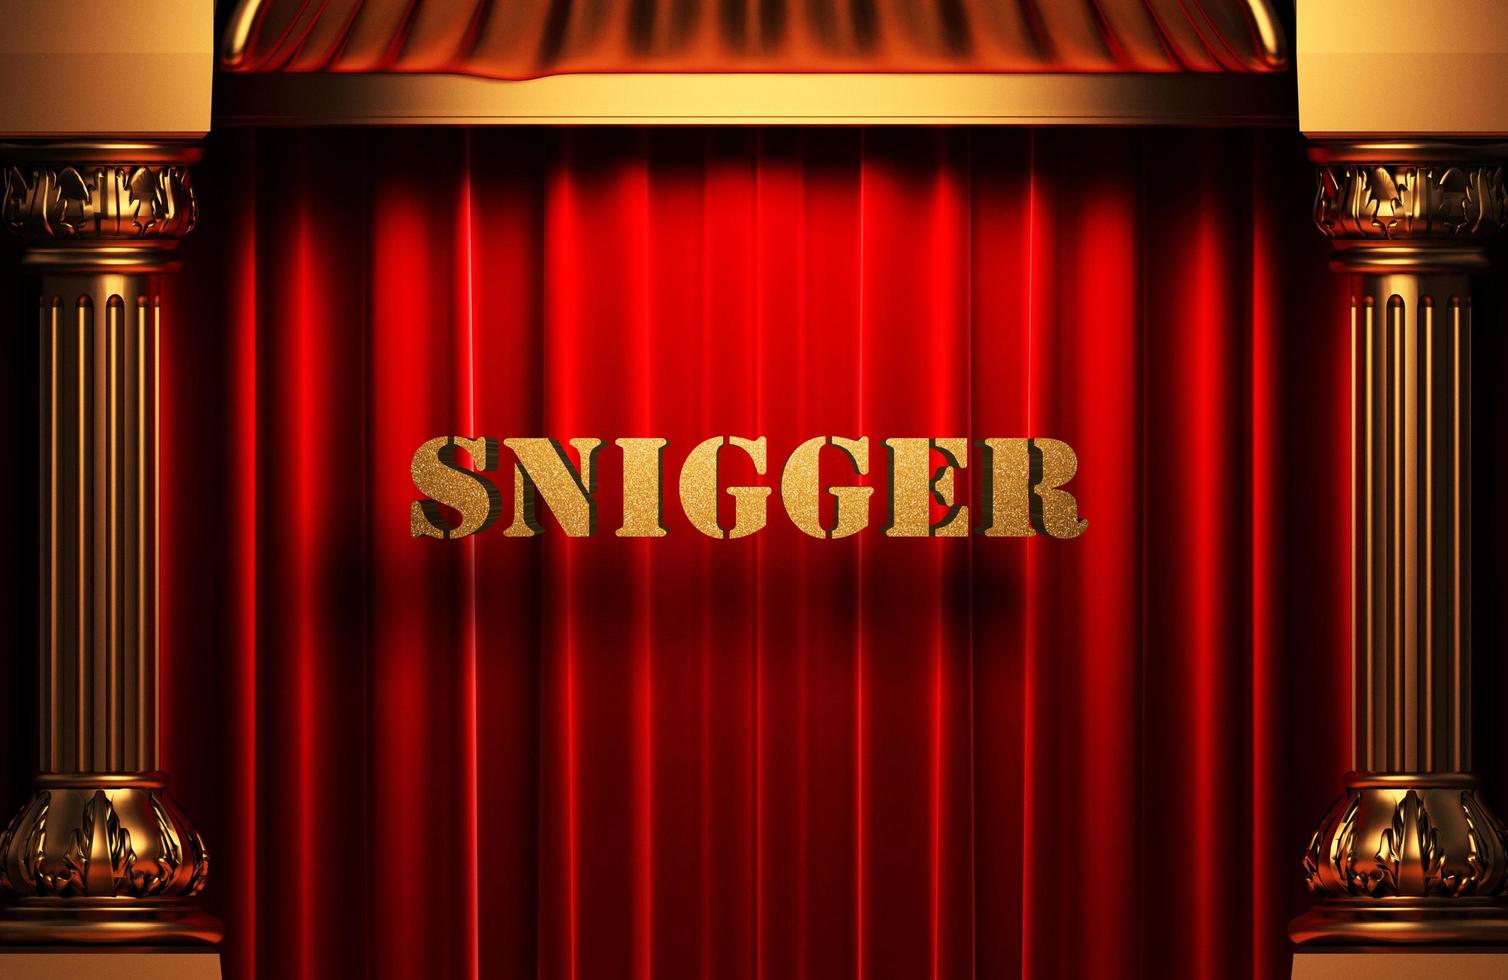 snigger golden word on red curtain photo